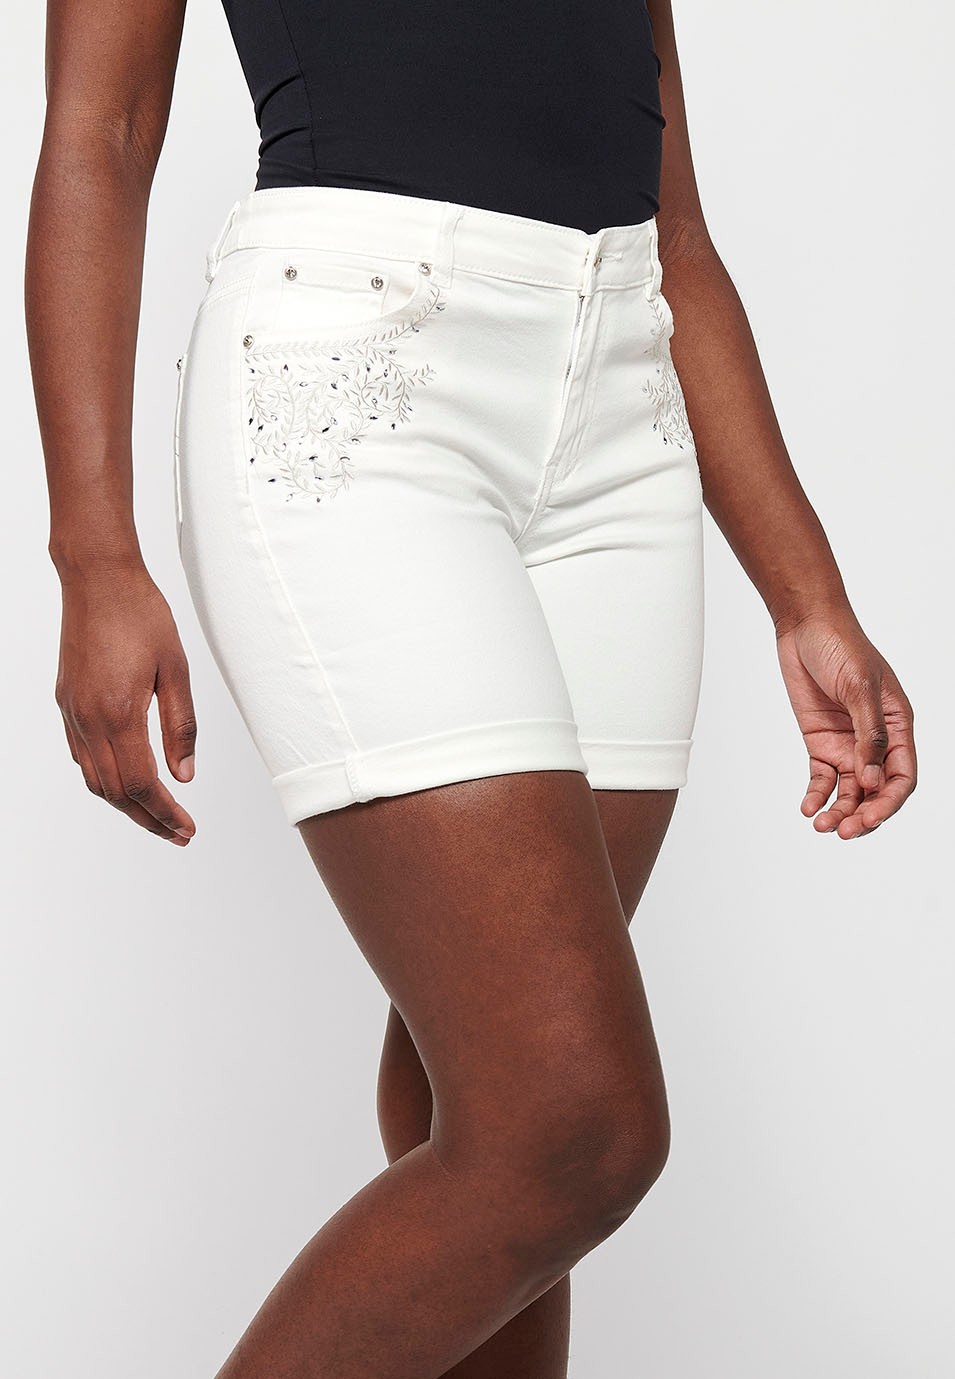 Shorts with cuffed finish with embroidery, white color for women